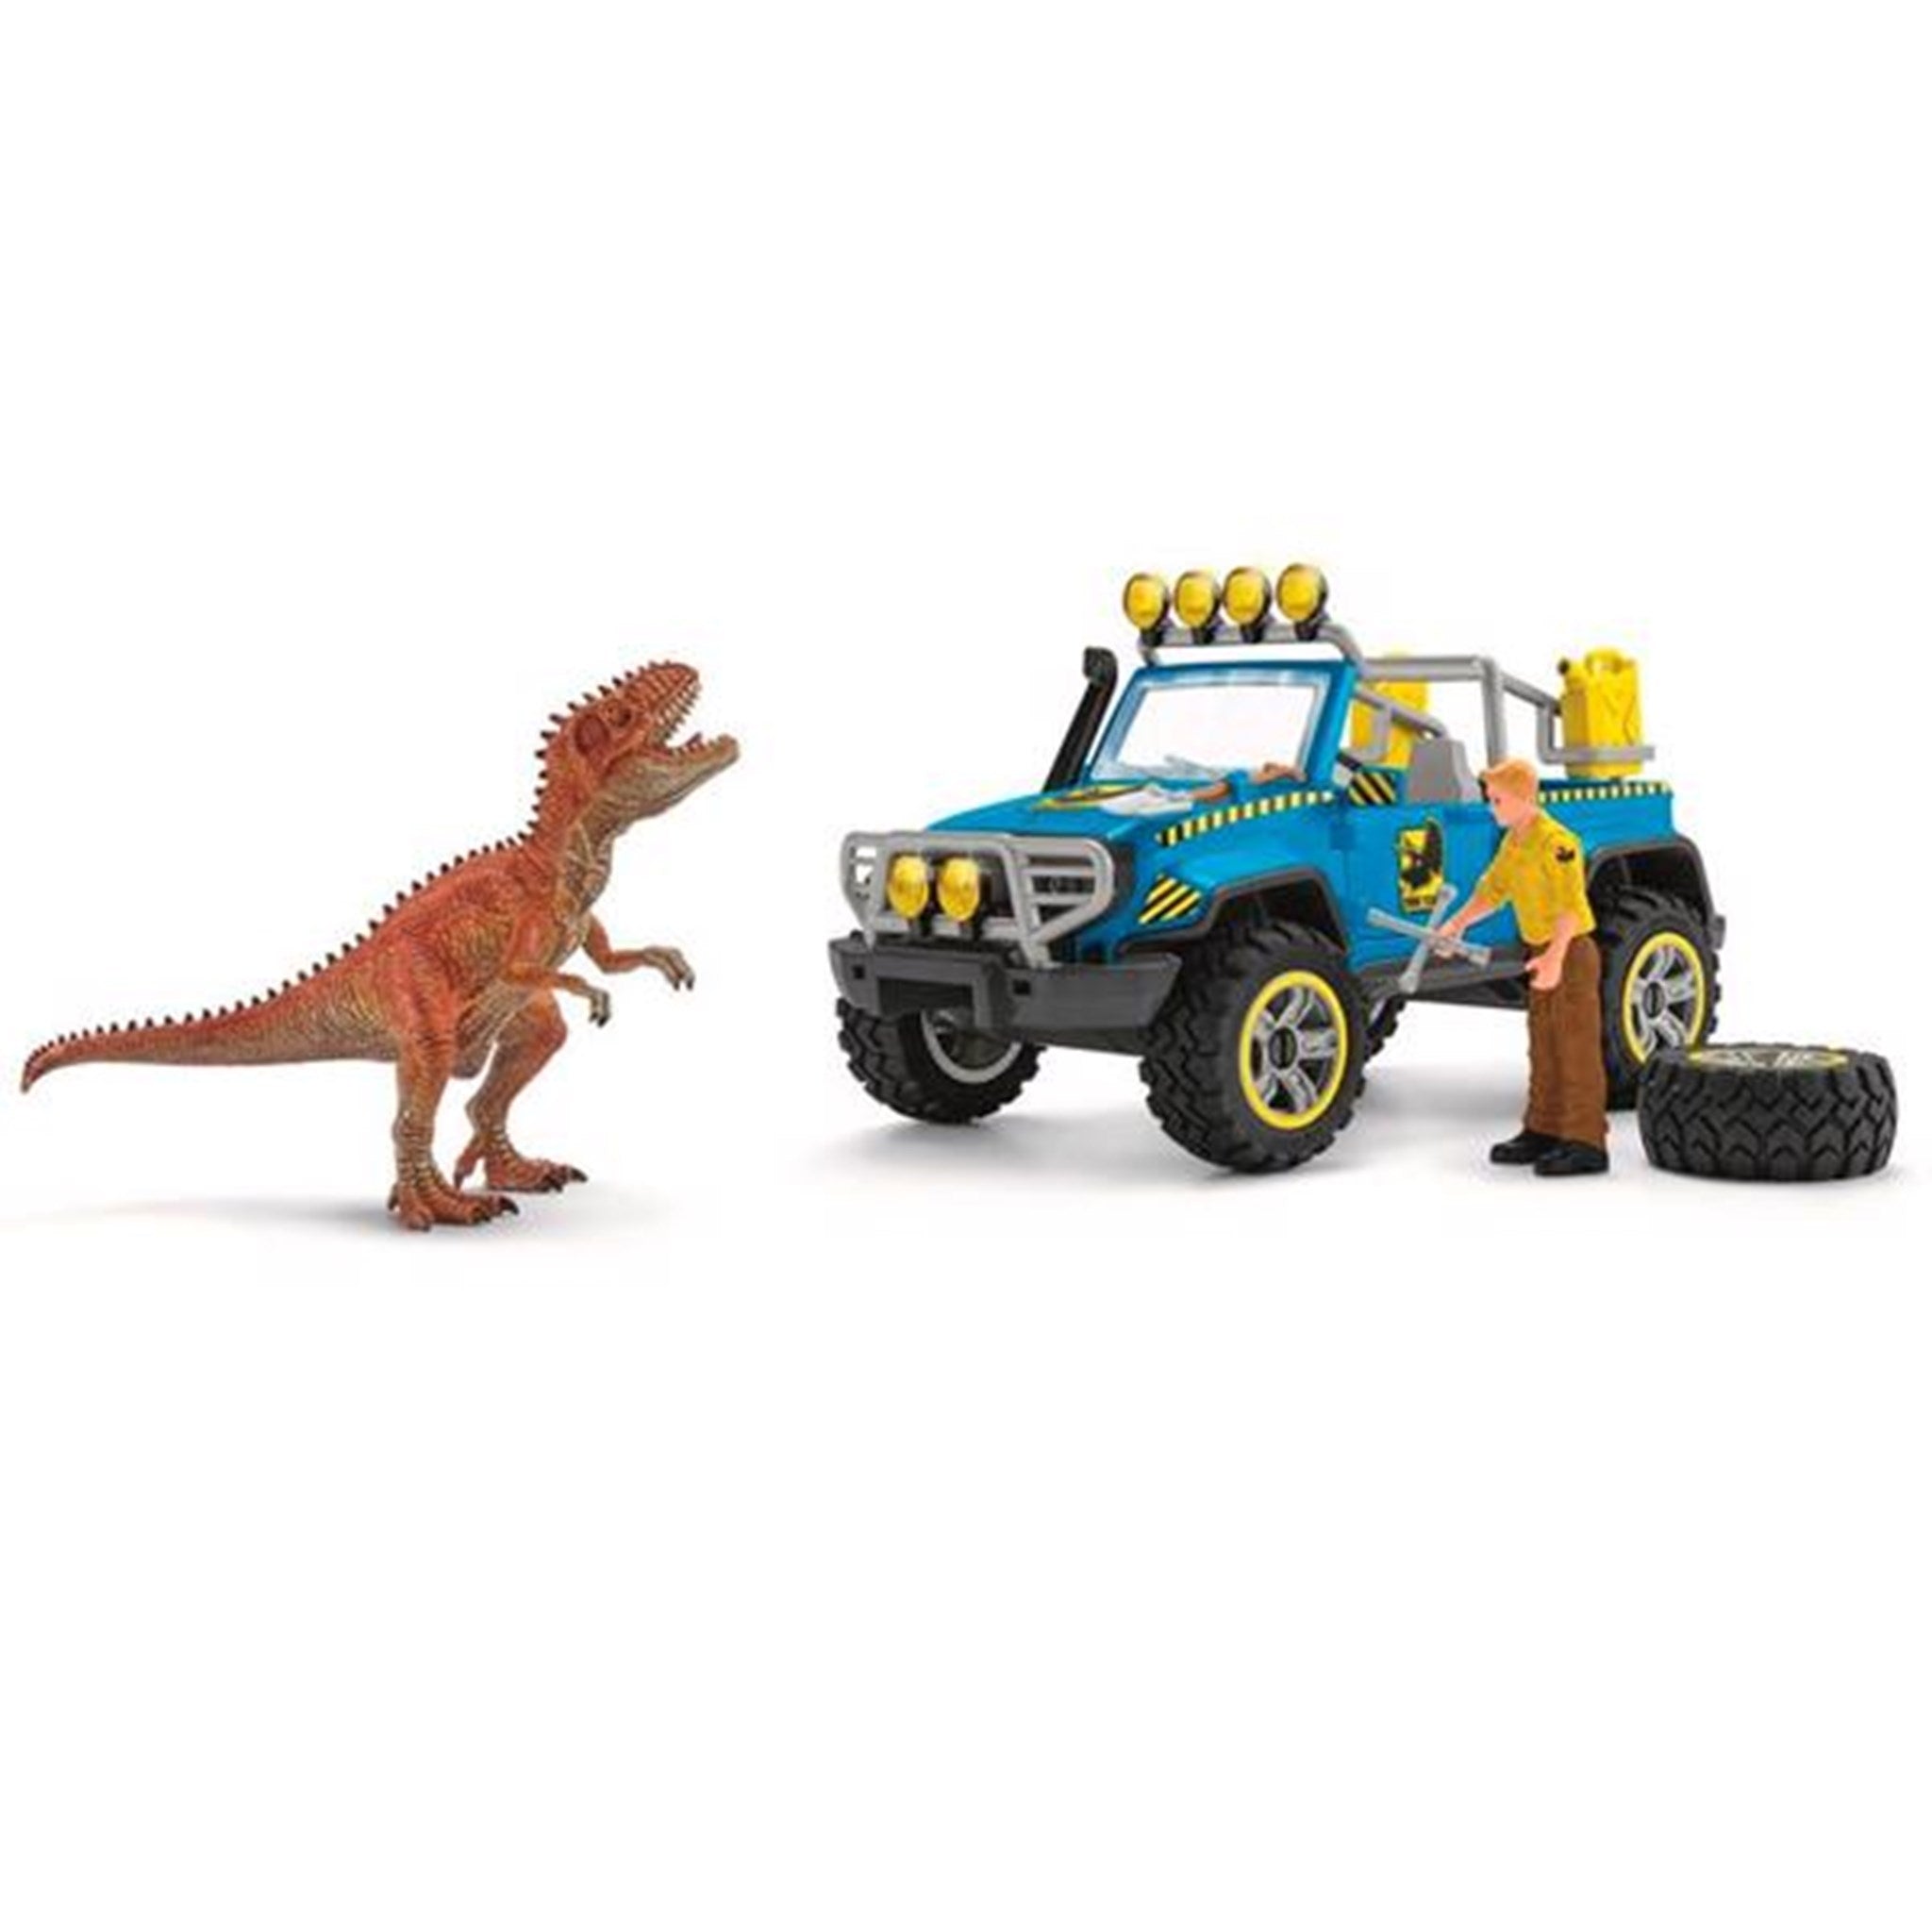 Schleich Dinosaurs Off-Road Vehicle w. Dino Outpost 3